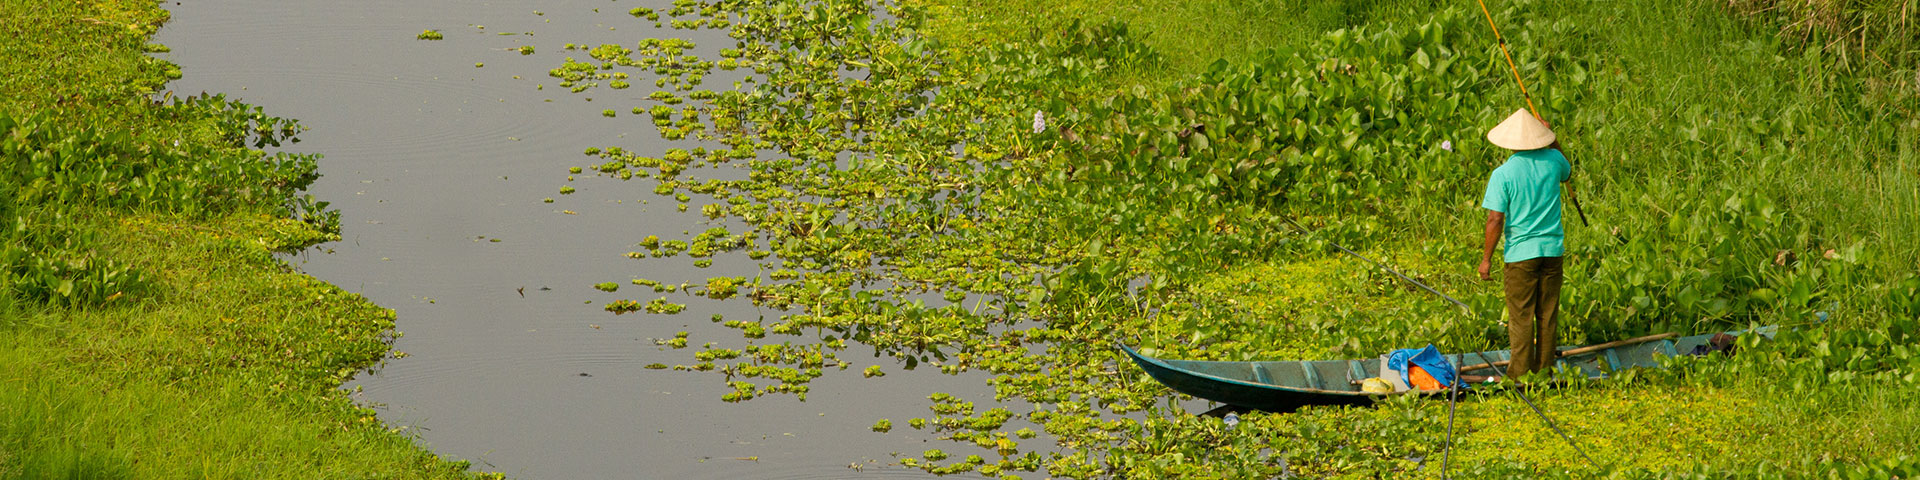 In a swamp, a man stands in a canoe holding a fishing rod.